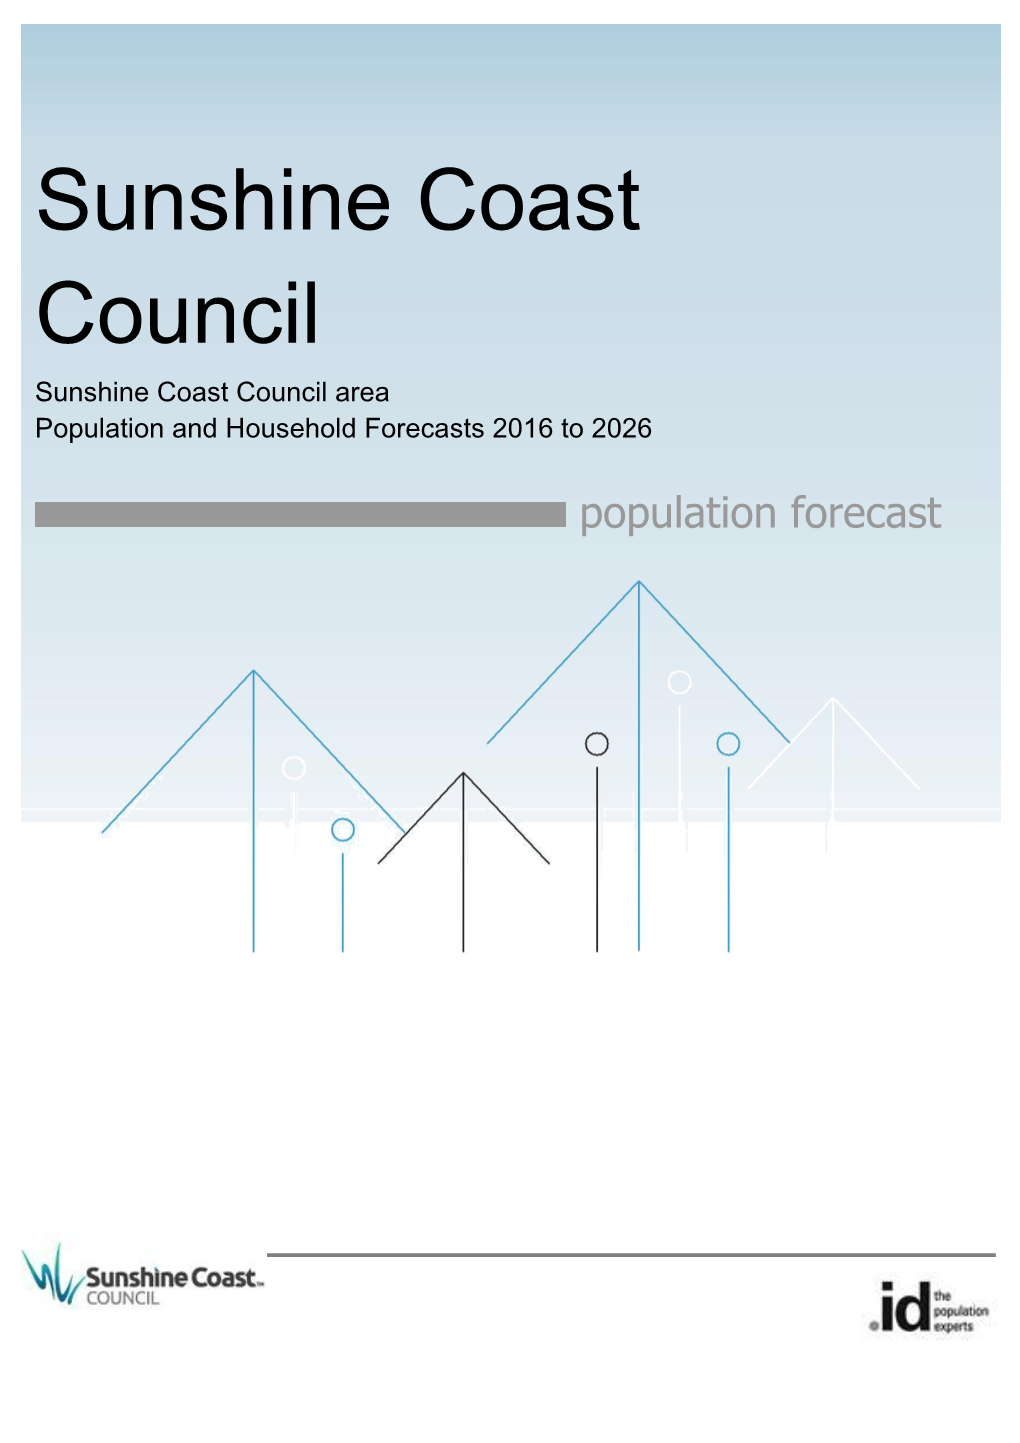 Sunshine Coast Council Sunshine Coast Council Area Population and Household Forecasts 2016 to 2026